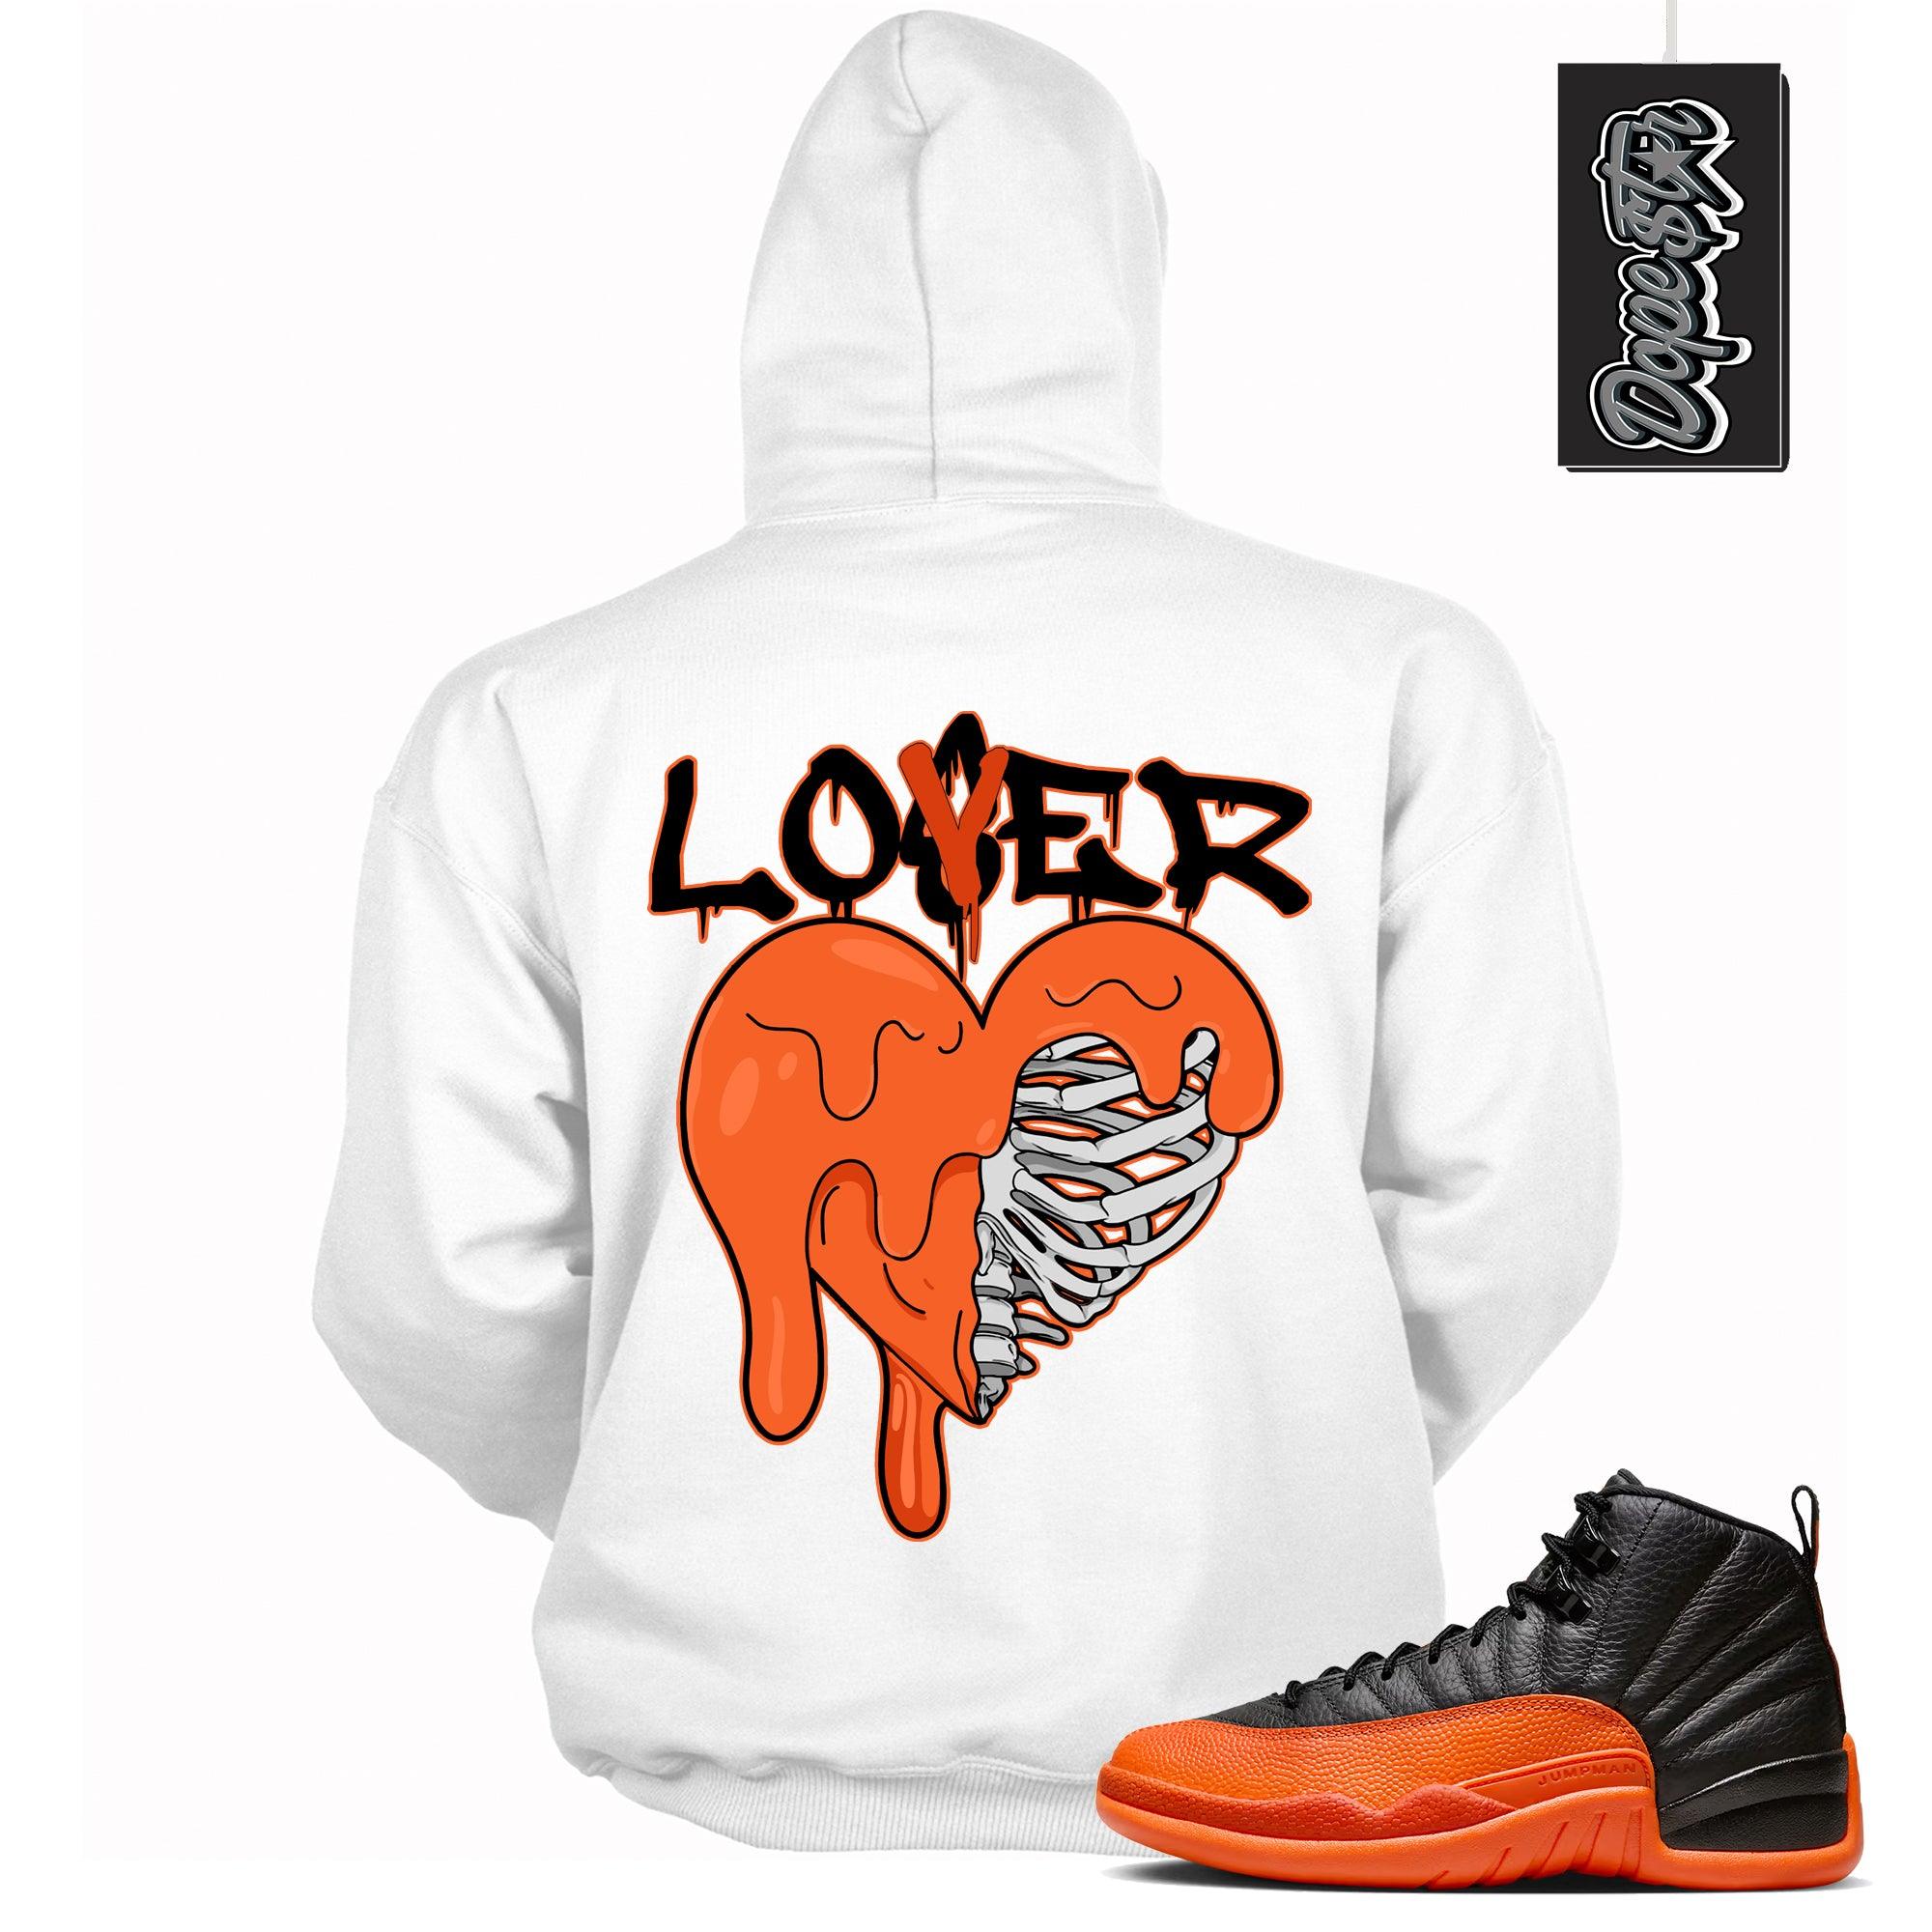 Cool White Graphic Hoodie with “ Lover Loser “ print, that perfectly matches Air Jordan 12 Retro WNBA All-Star Brilliant Orange  sneakers